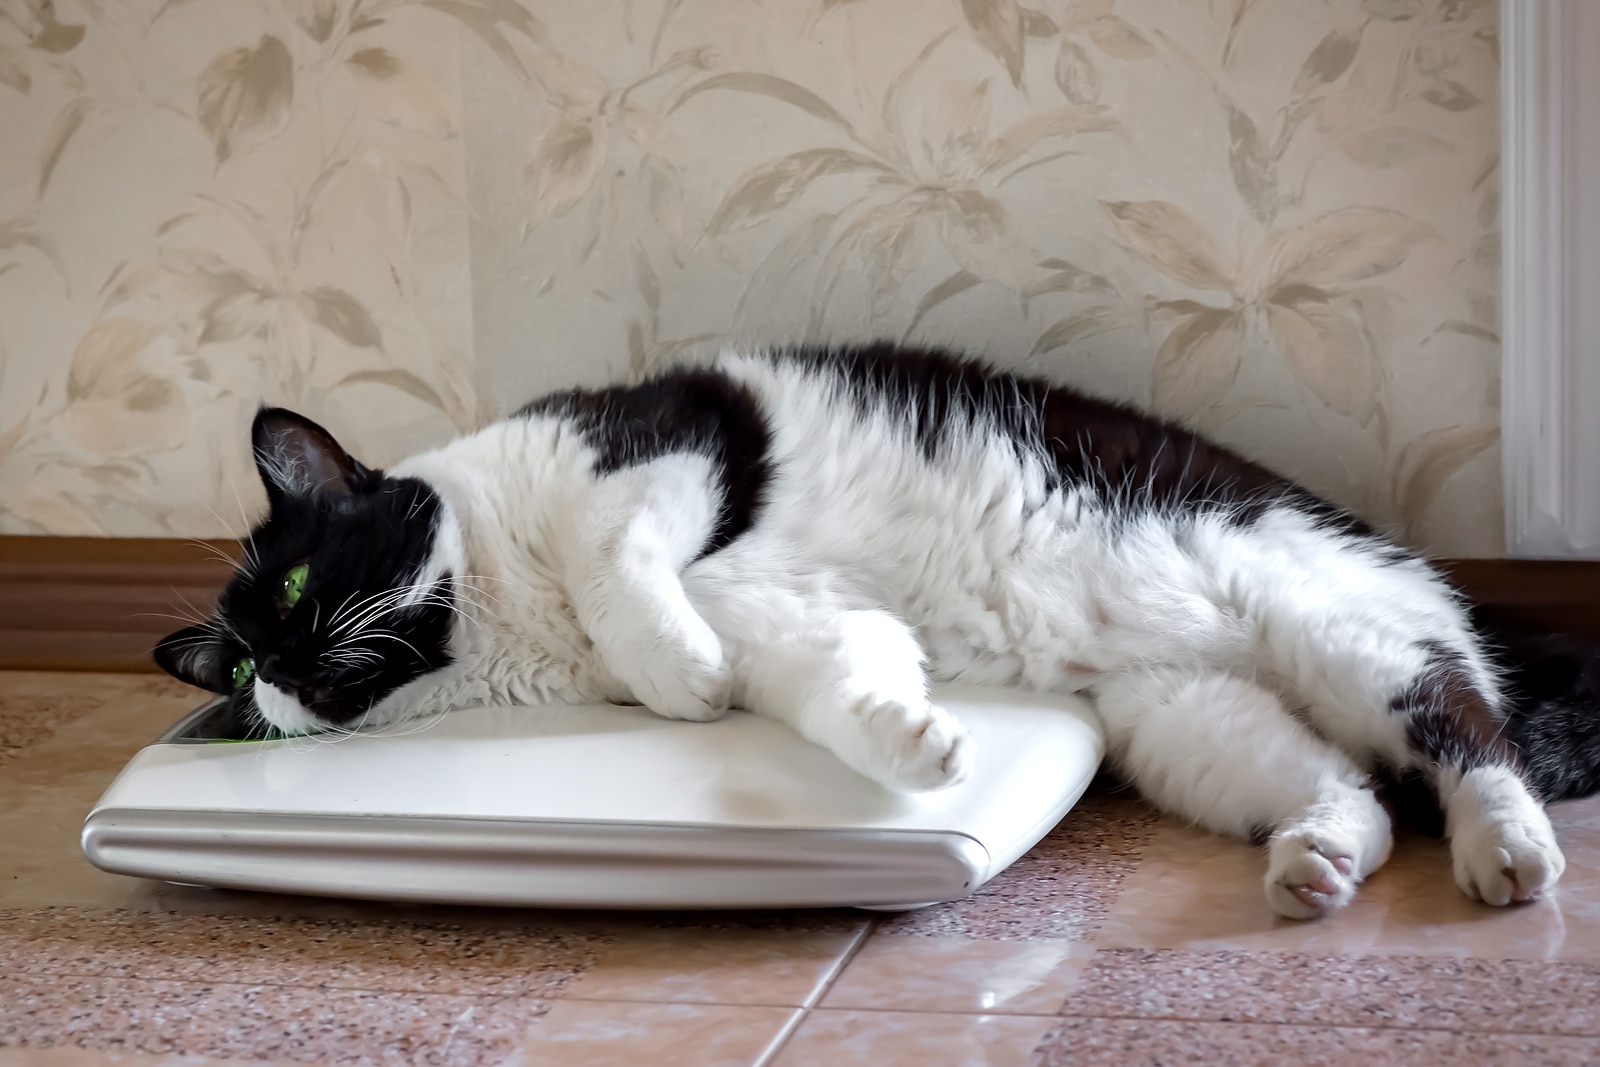 White cat with black spots lays on a weight scale